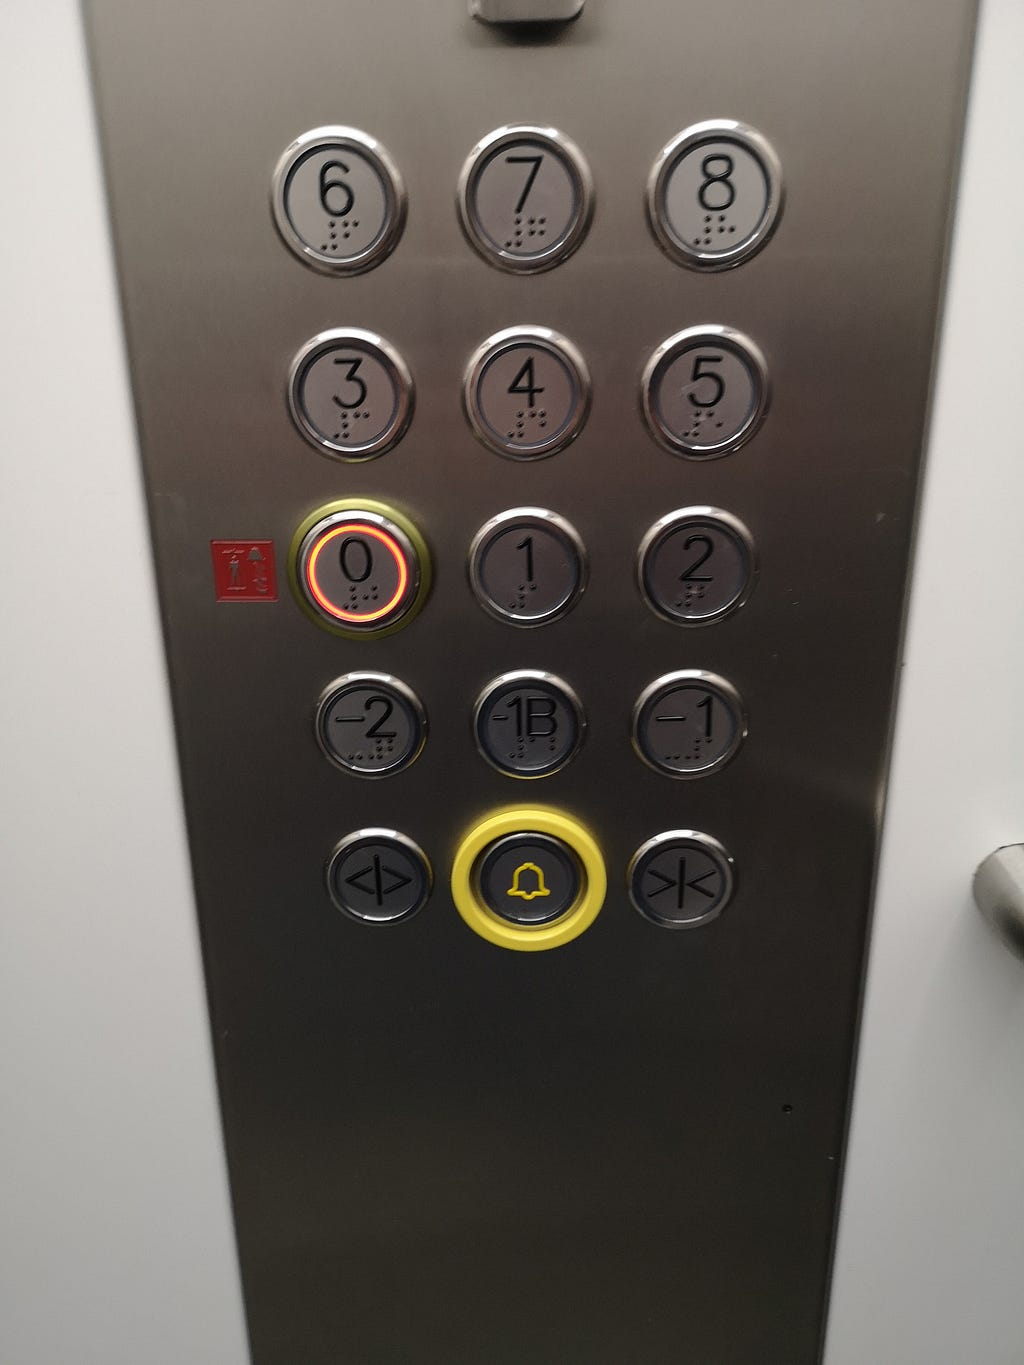 One of the hotel’s elevators with buttons arranged in a certain way. This has a 0 button to represent the entrance floor.